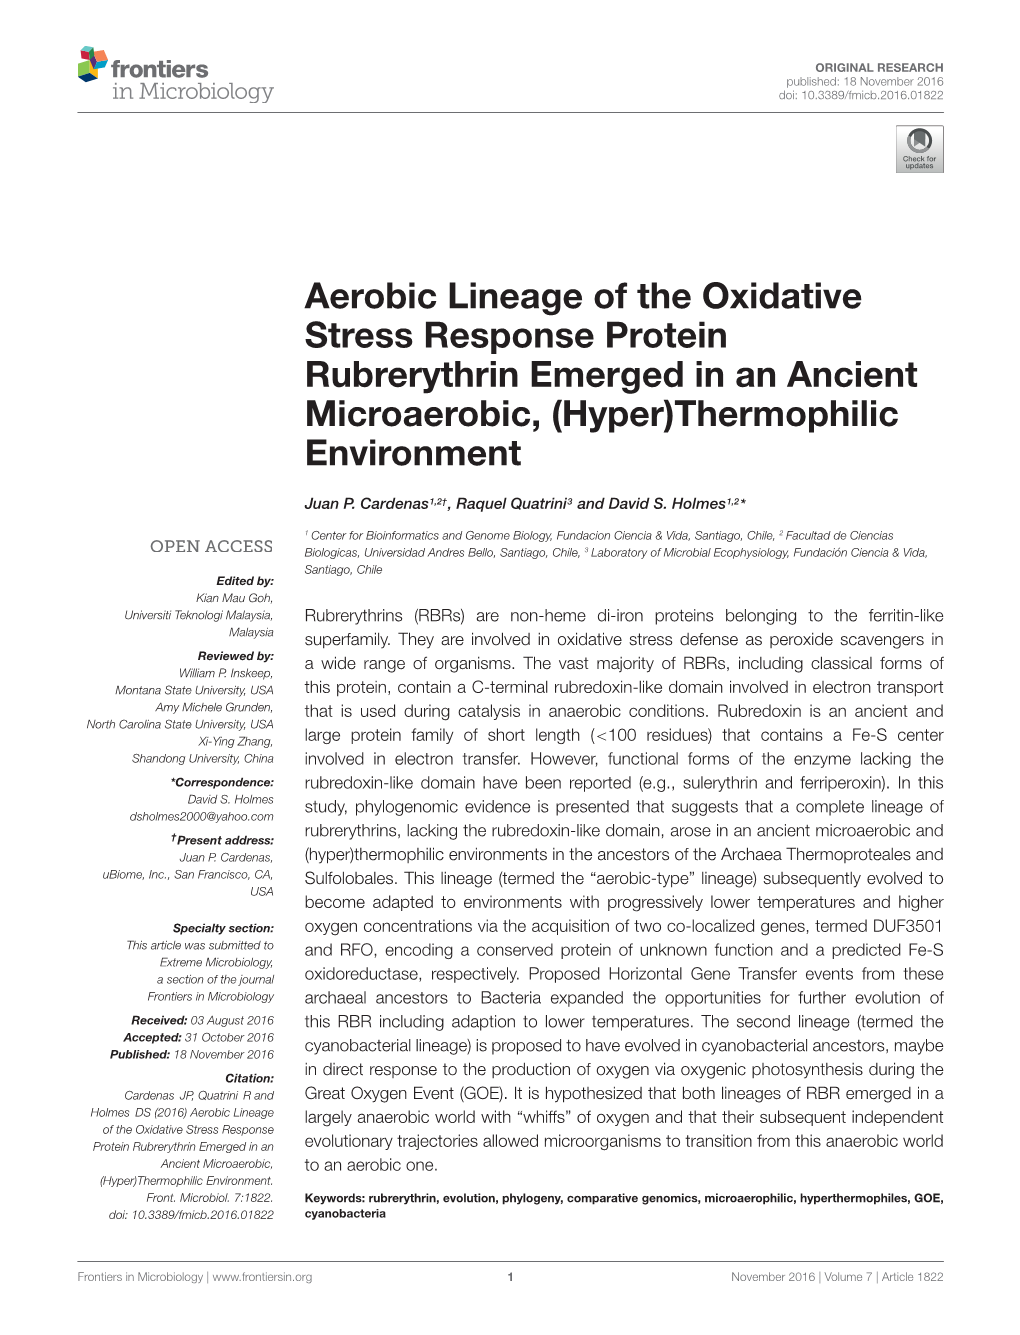 Aerobic Lineage of the Oxidative Stress Response Protein Rubrerythrin Emerged in an Ancient Microaerobic, (Hyper)Thermophilic Environment